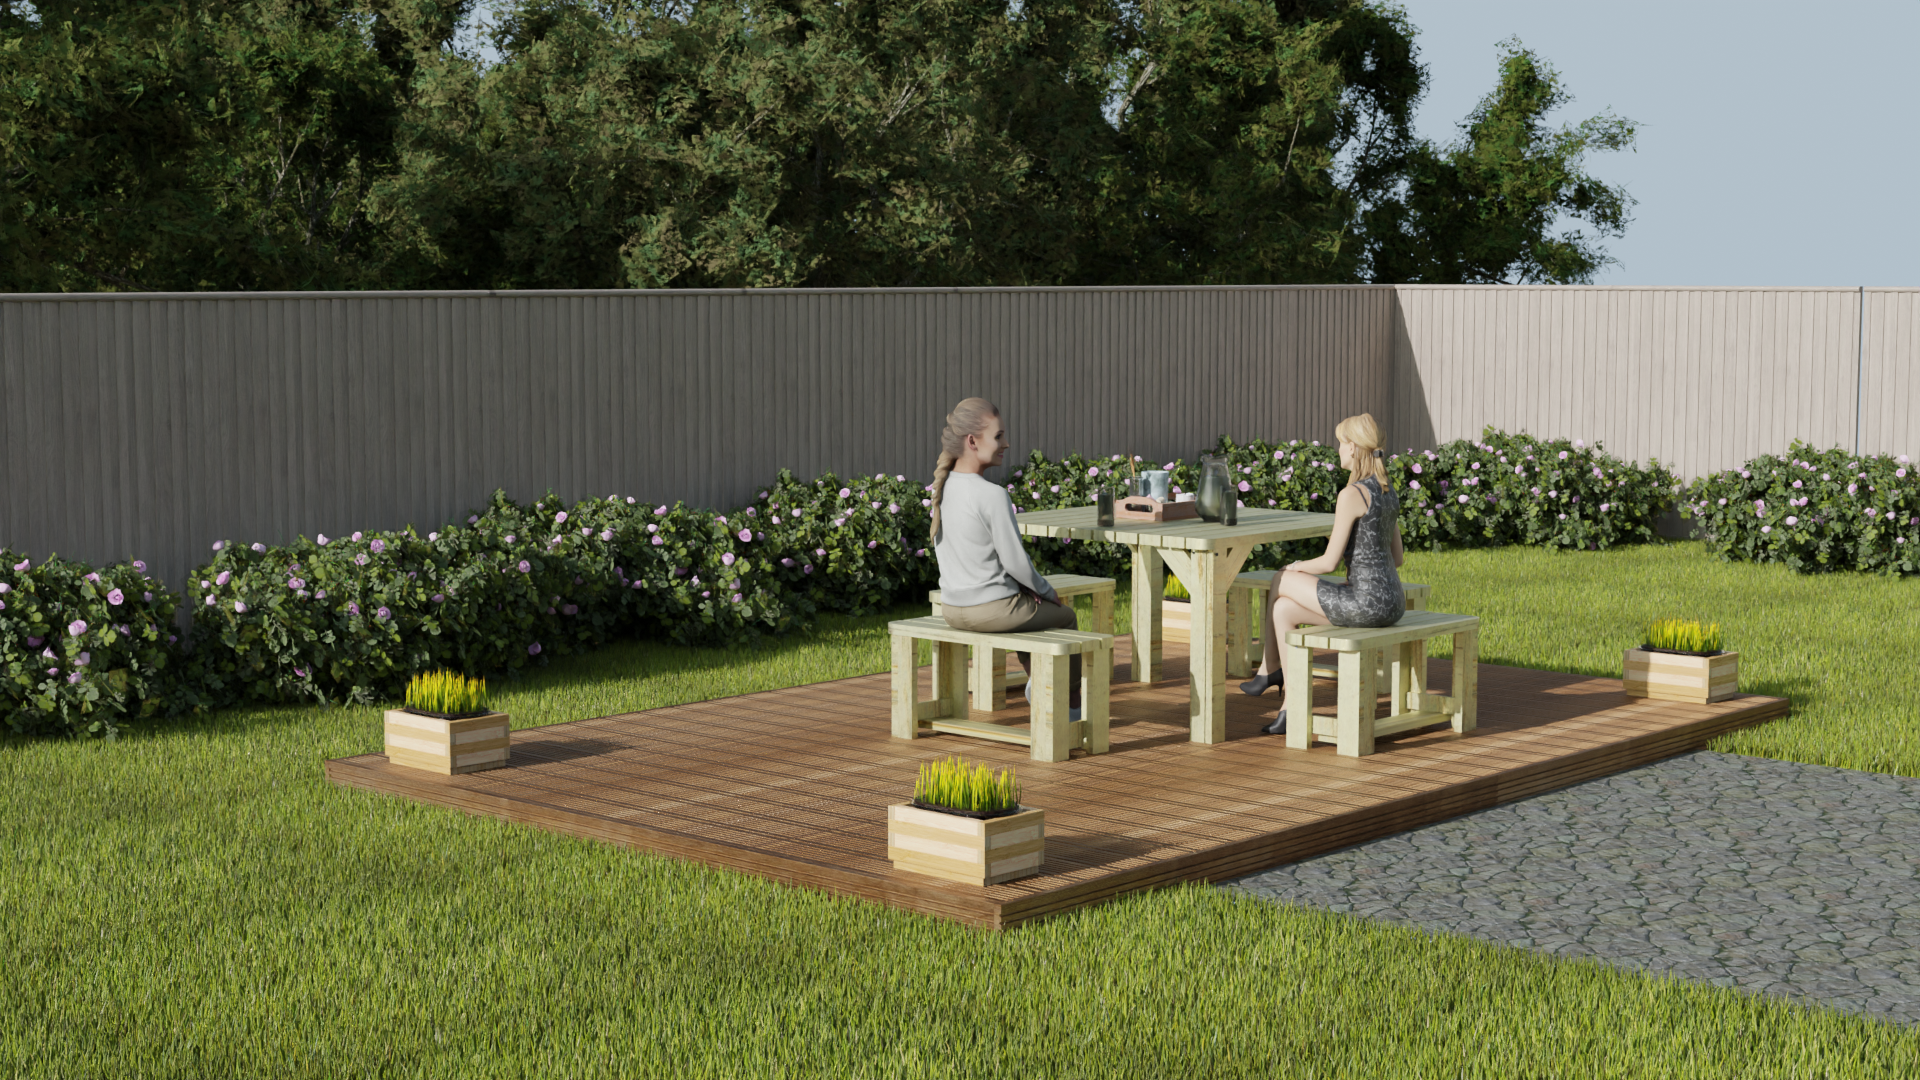 Revamp Your Garden with an Affordable and Easy-to-Assemble Decking Kit